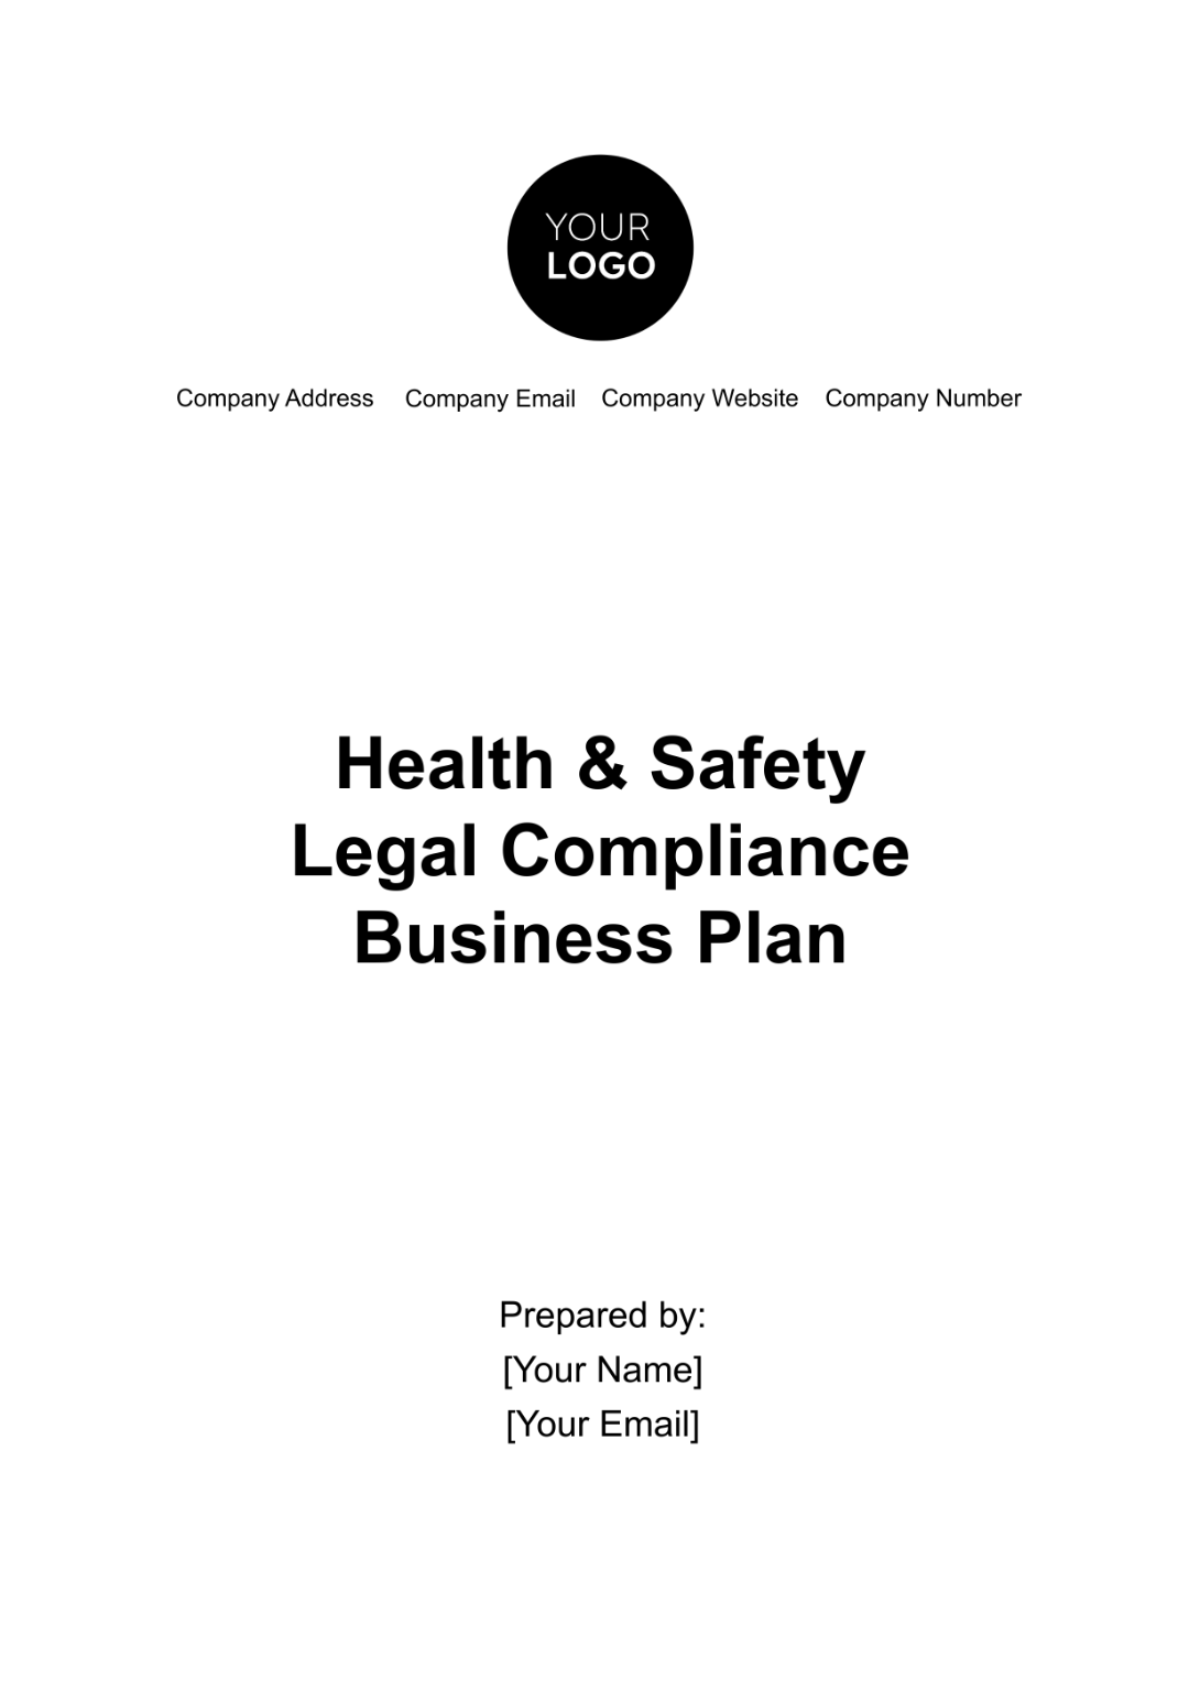 Health & Safety Legal Compliance Business Plan Template